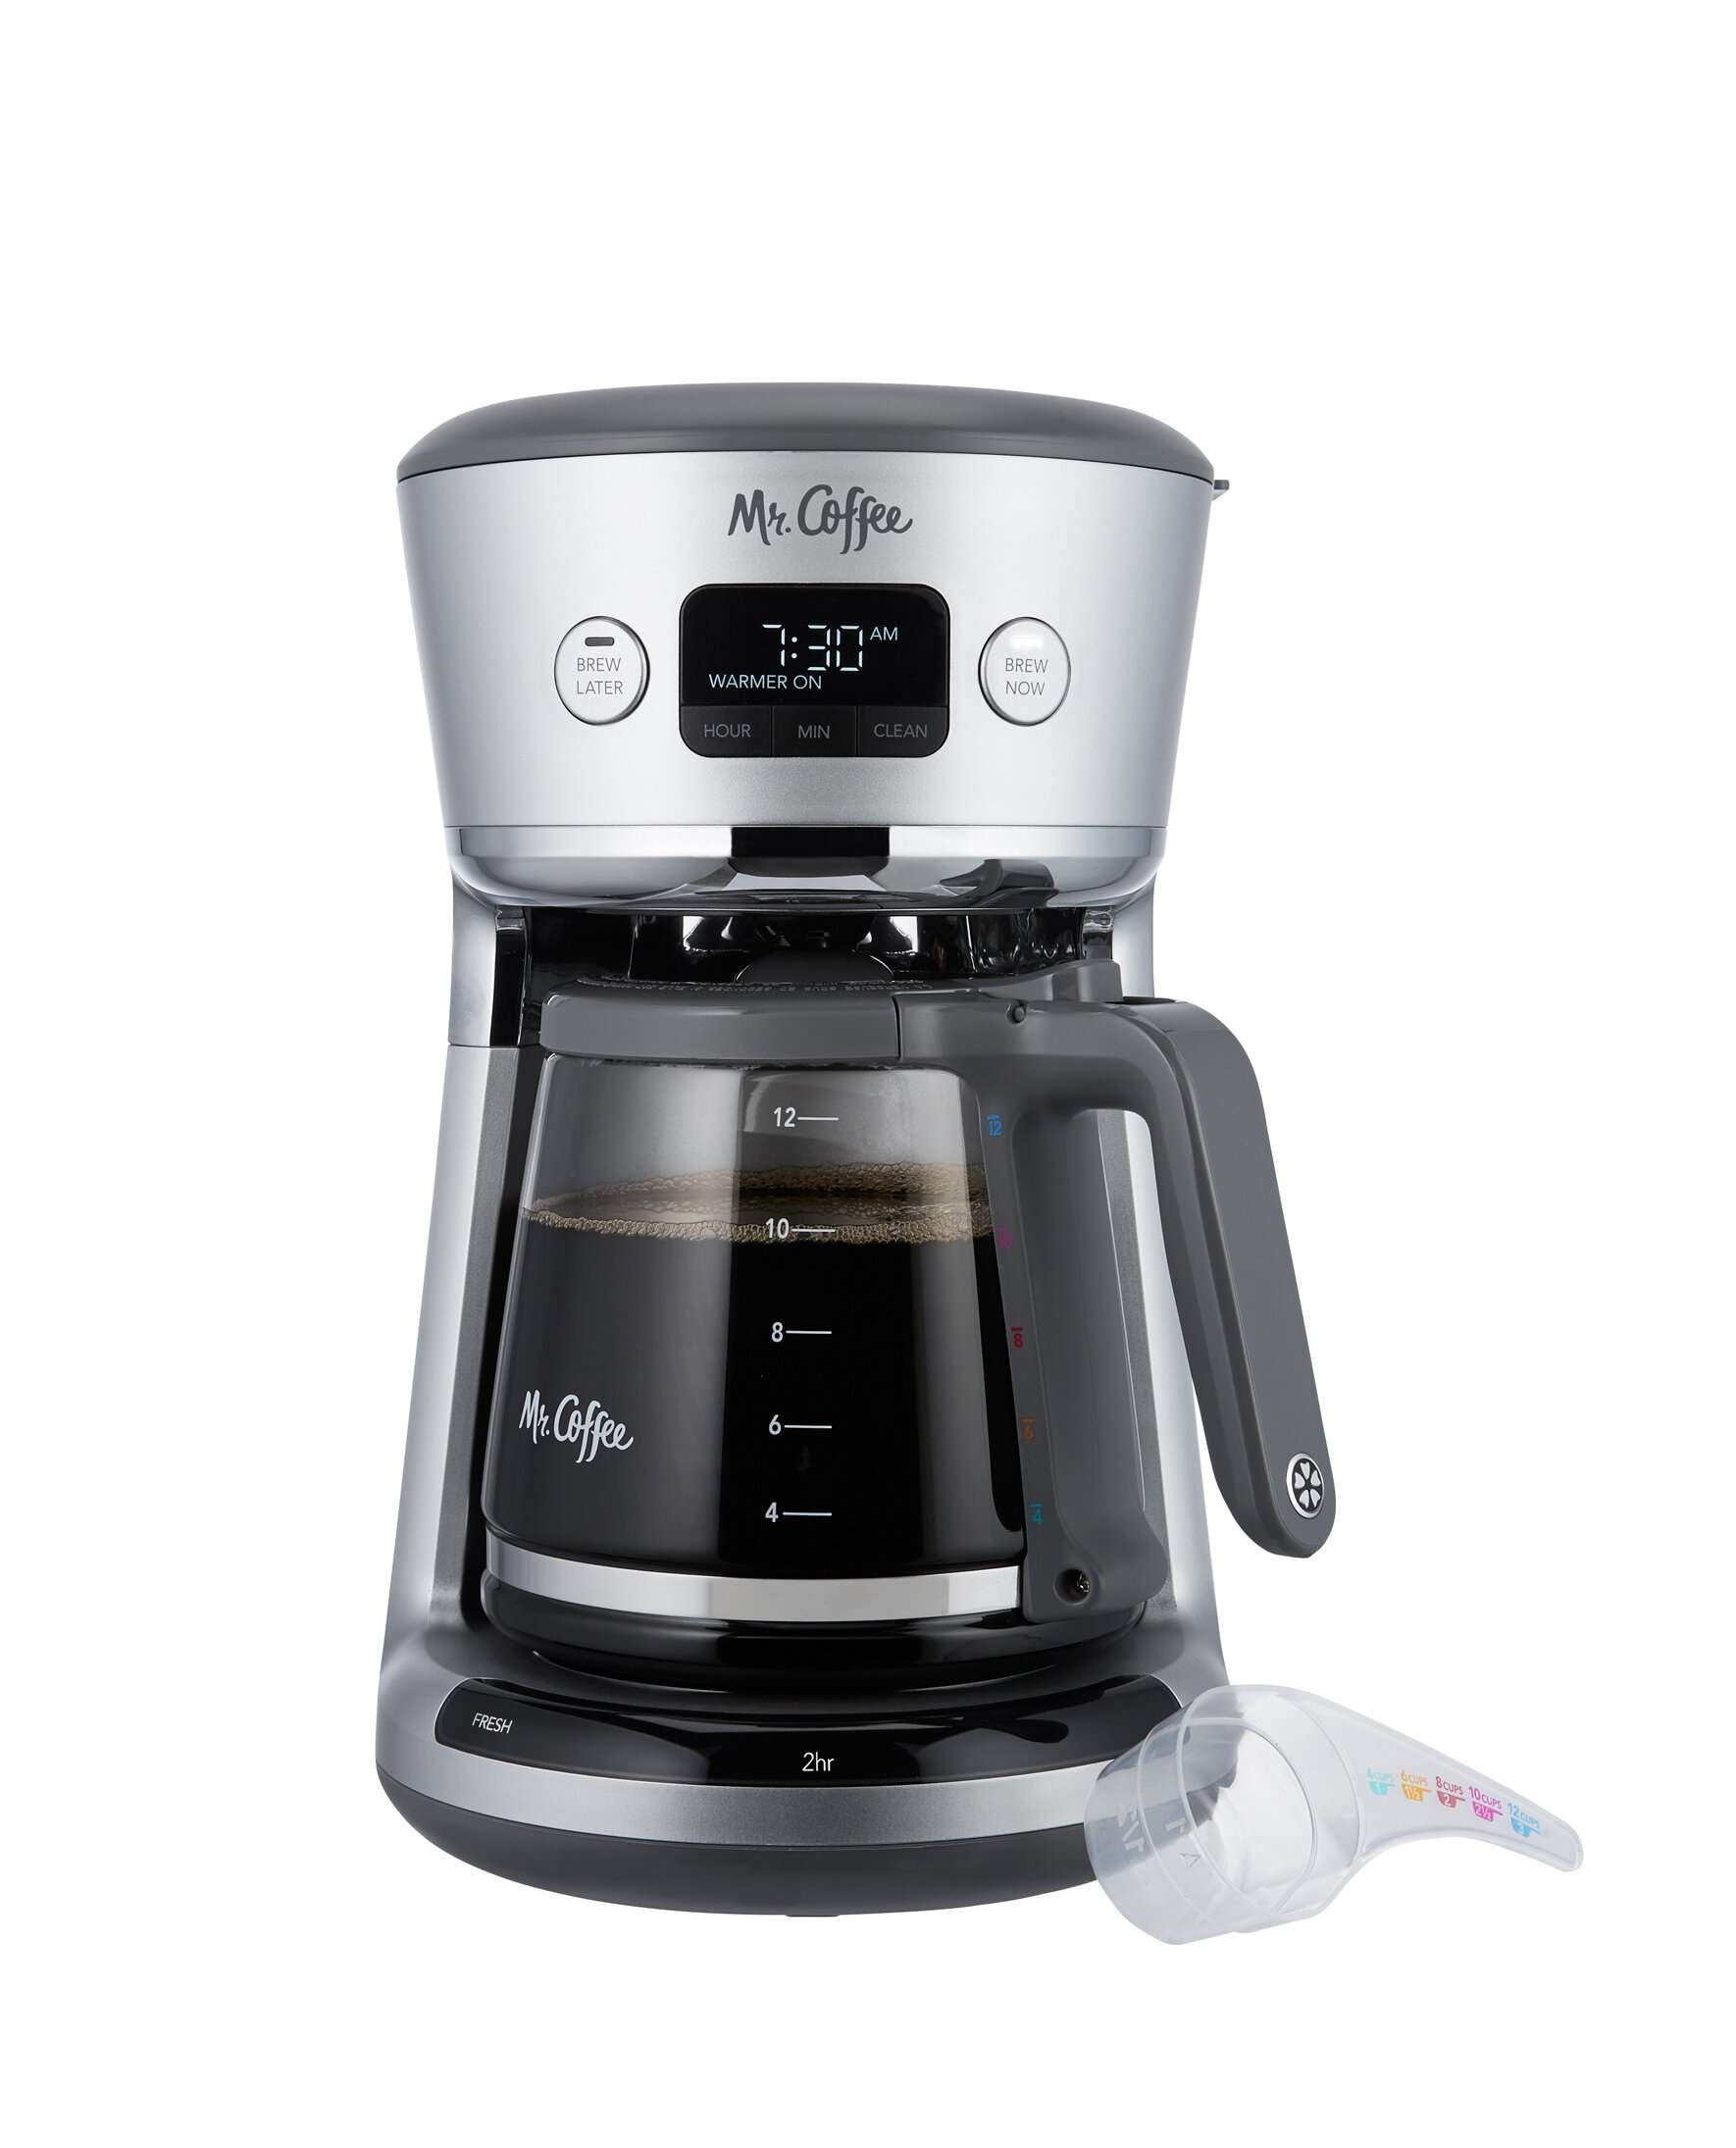 How To Clean Mr Coffee Coffee Maker : Mr Coffee Kitchen Mr ...